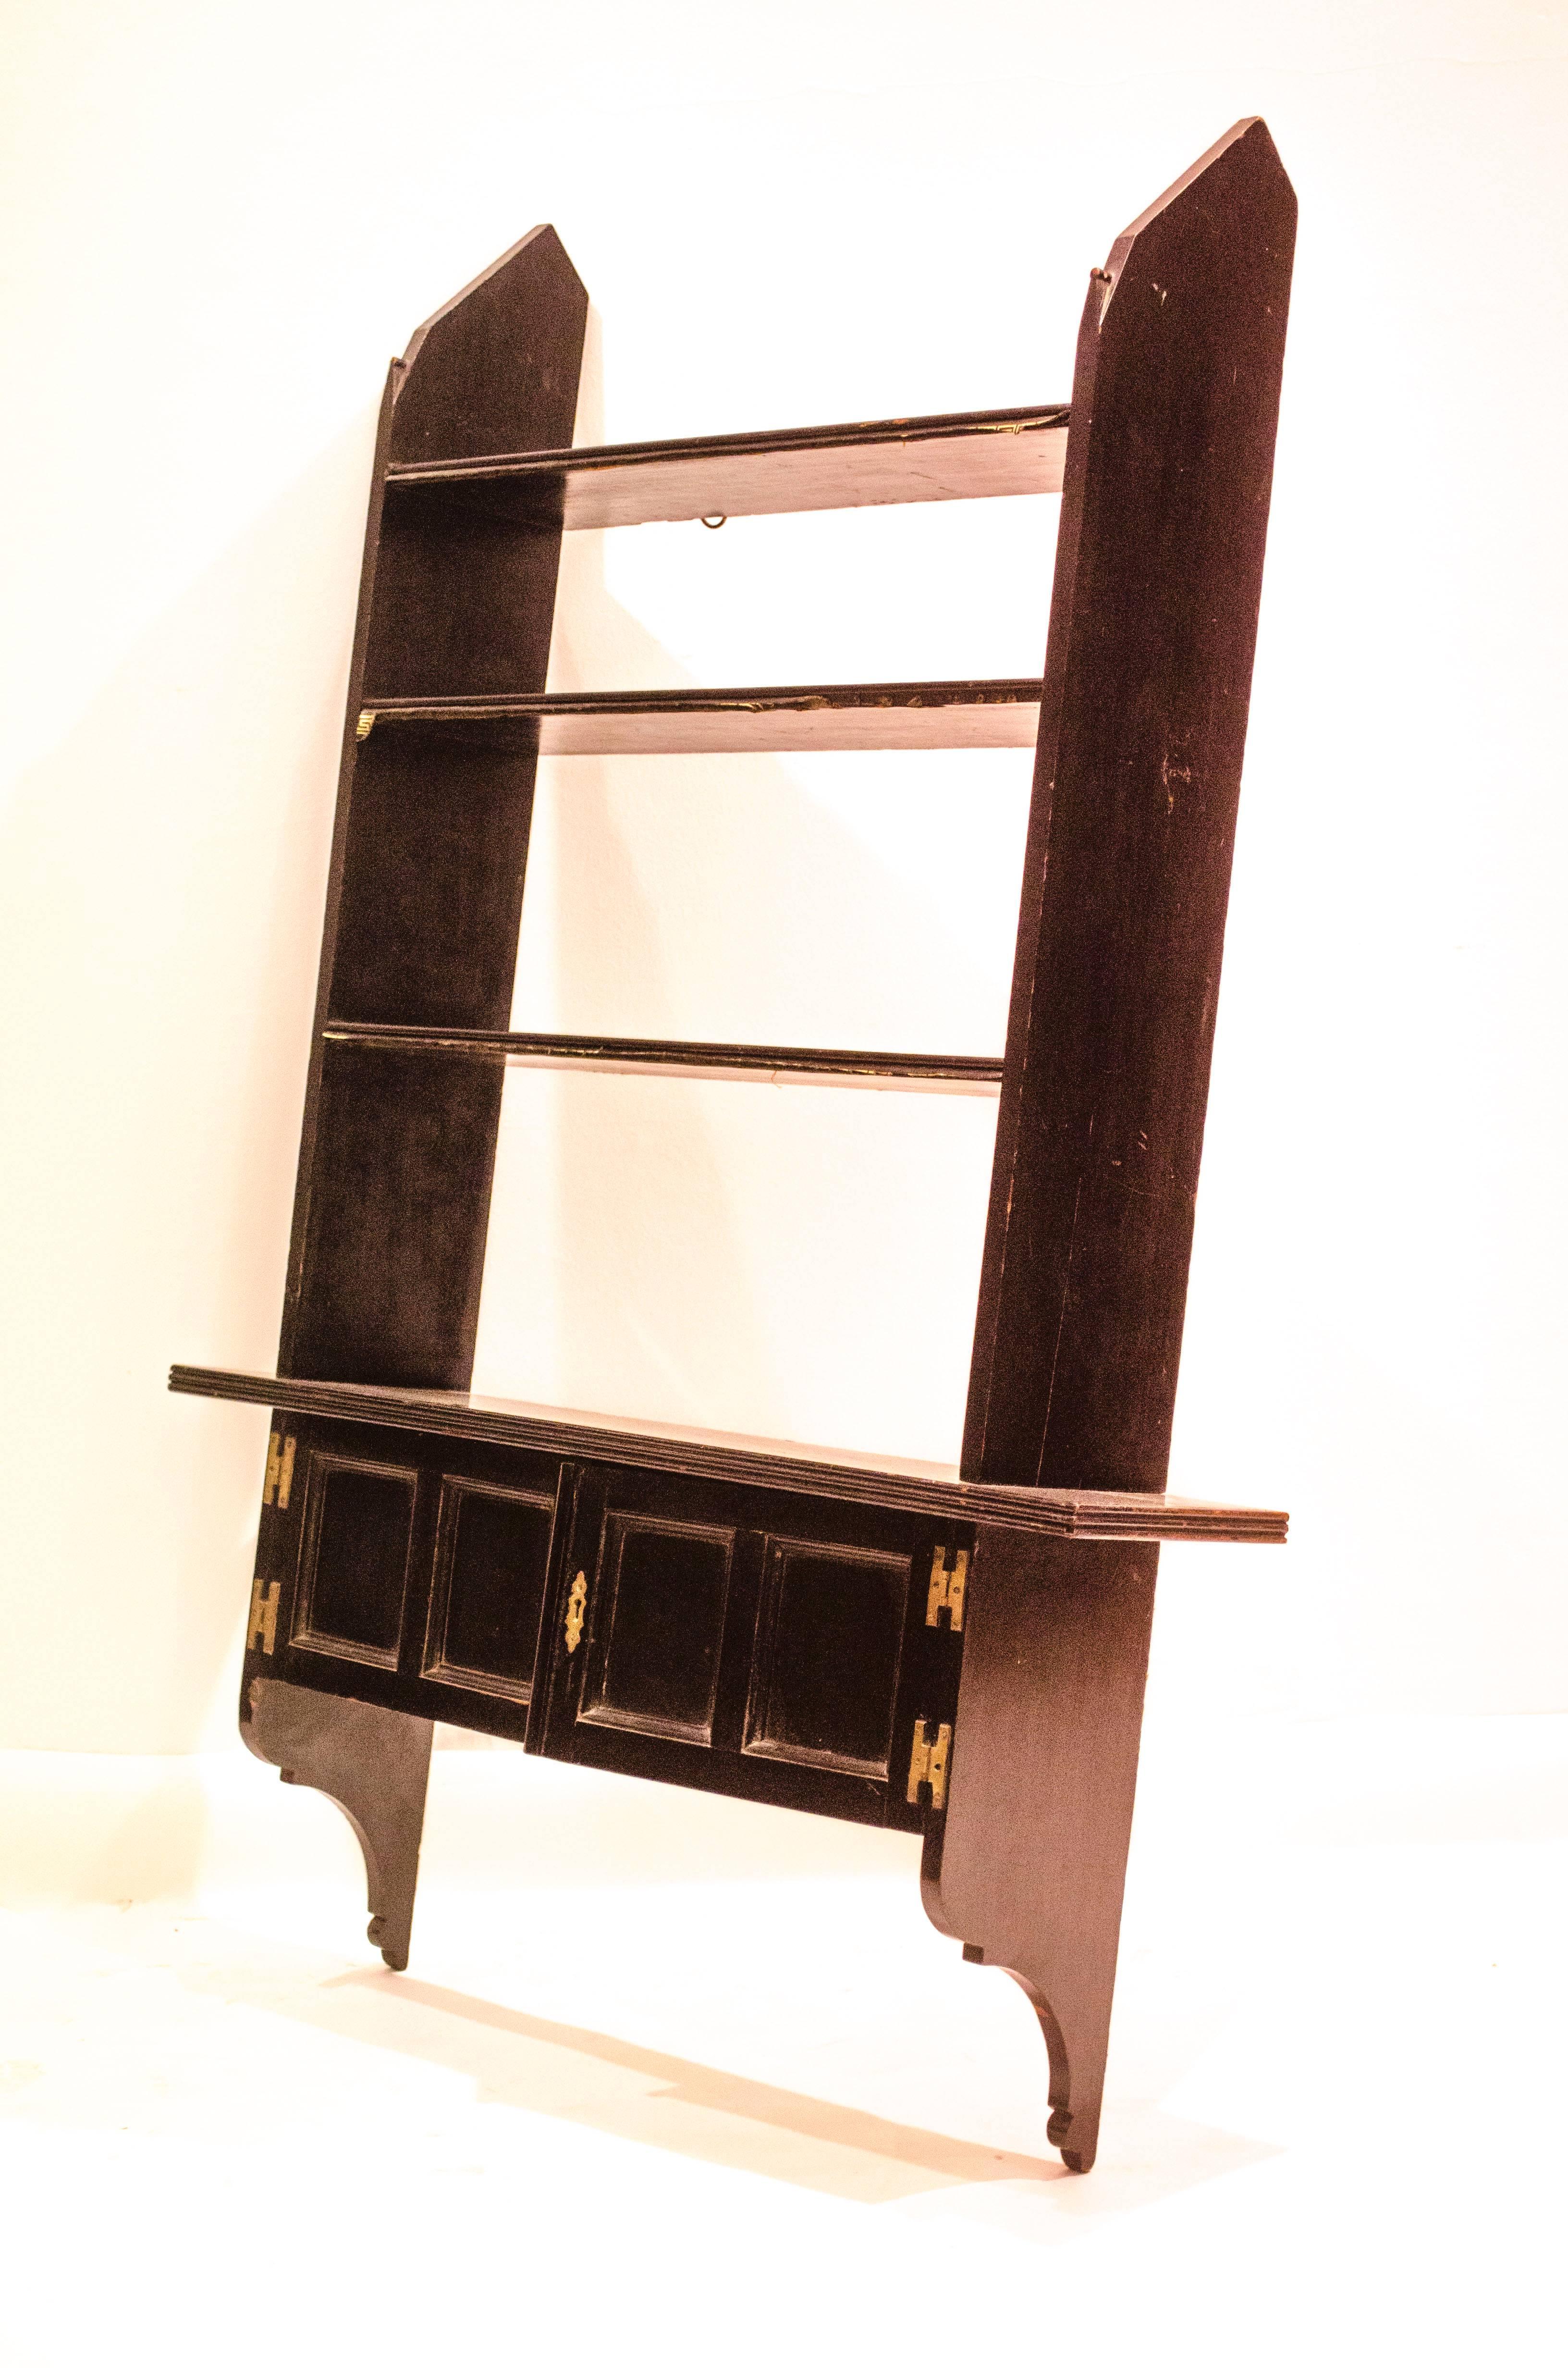 Edward William Godwin (1833-1886). Made by William Watt or Edwards and Roberts
A rare set of Anglo-Japanese ebonized hanging bookshelves with an extending lower shelf and a two-door hanging book cupboard beneath, brass hinges, and an